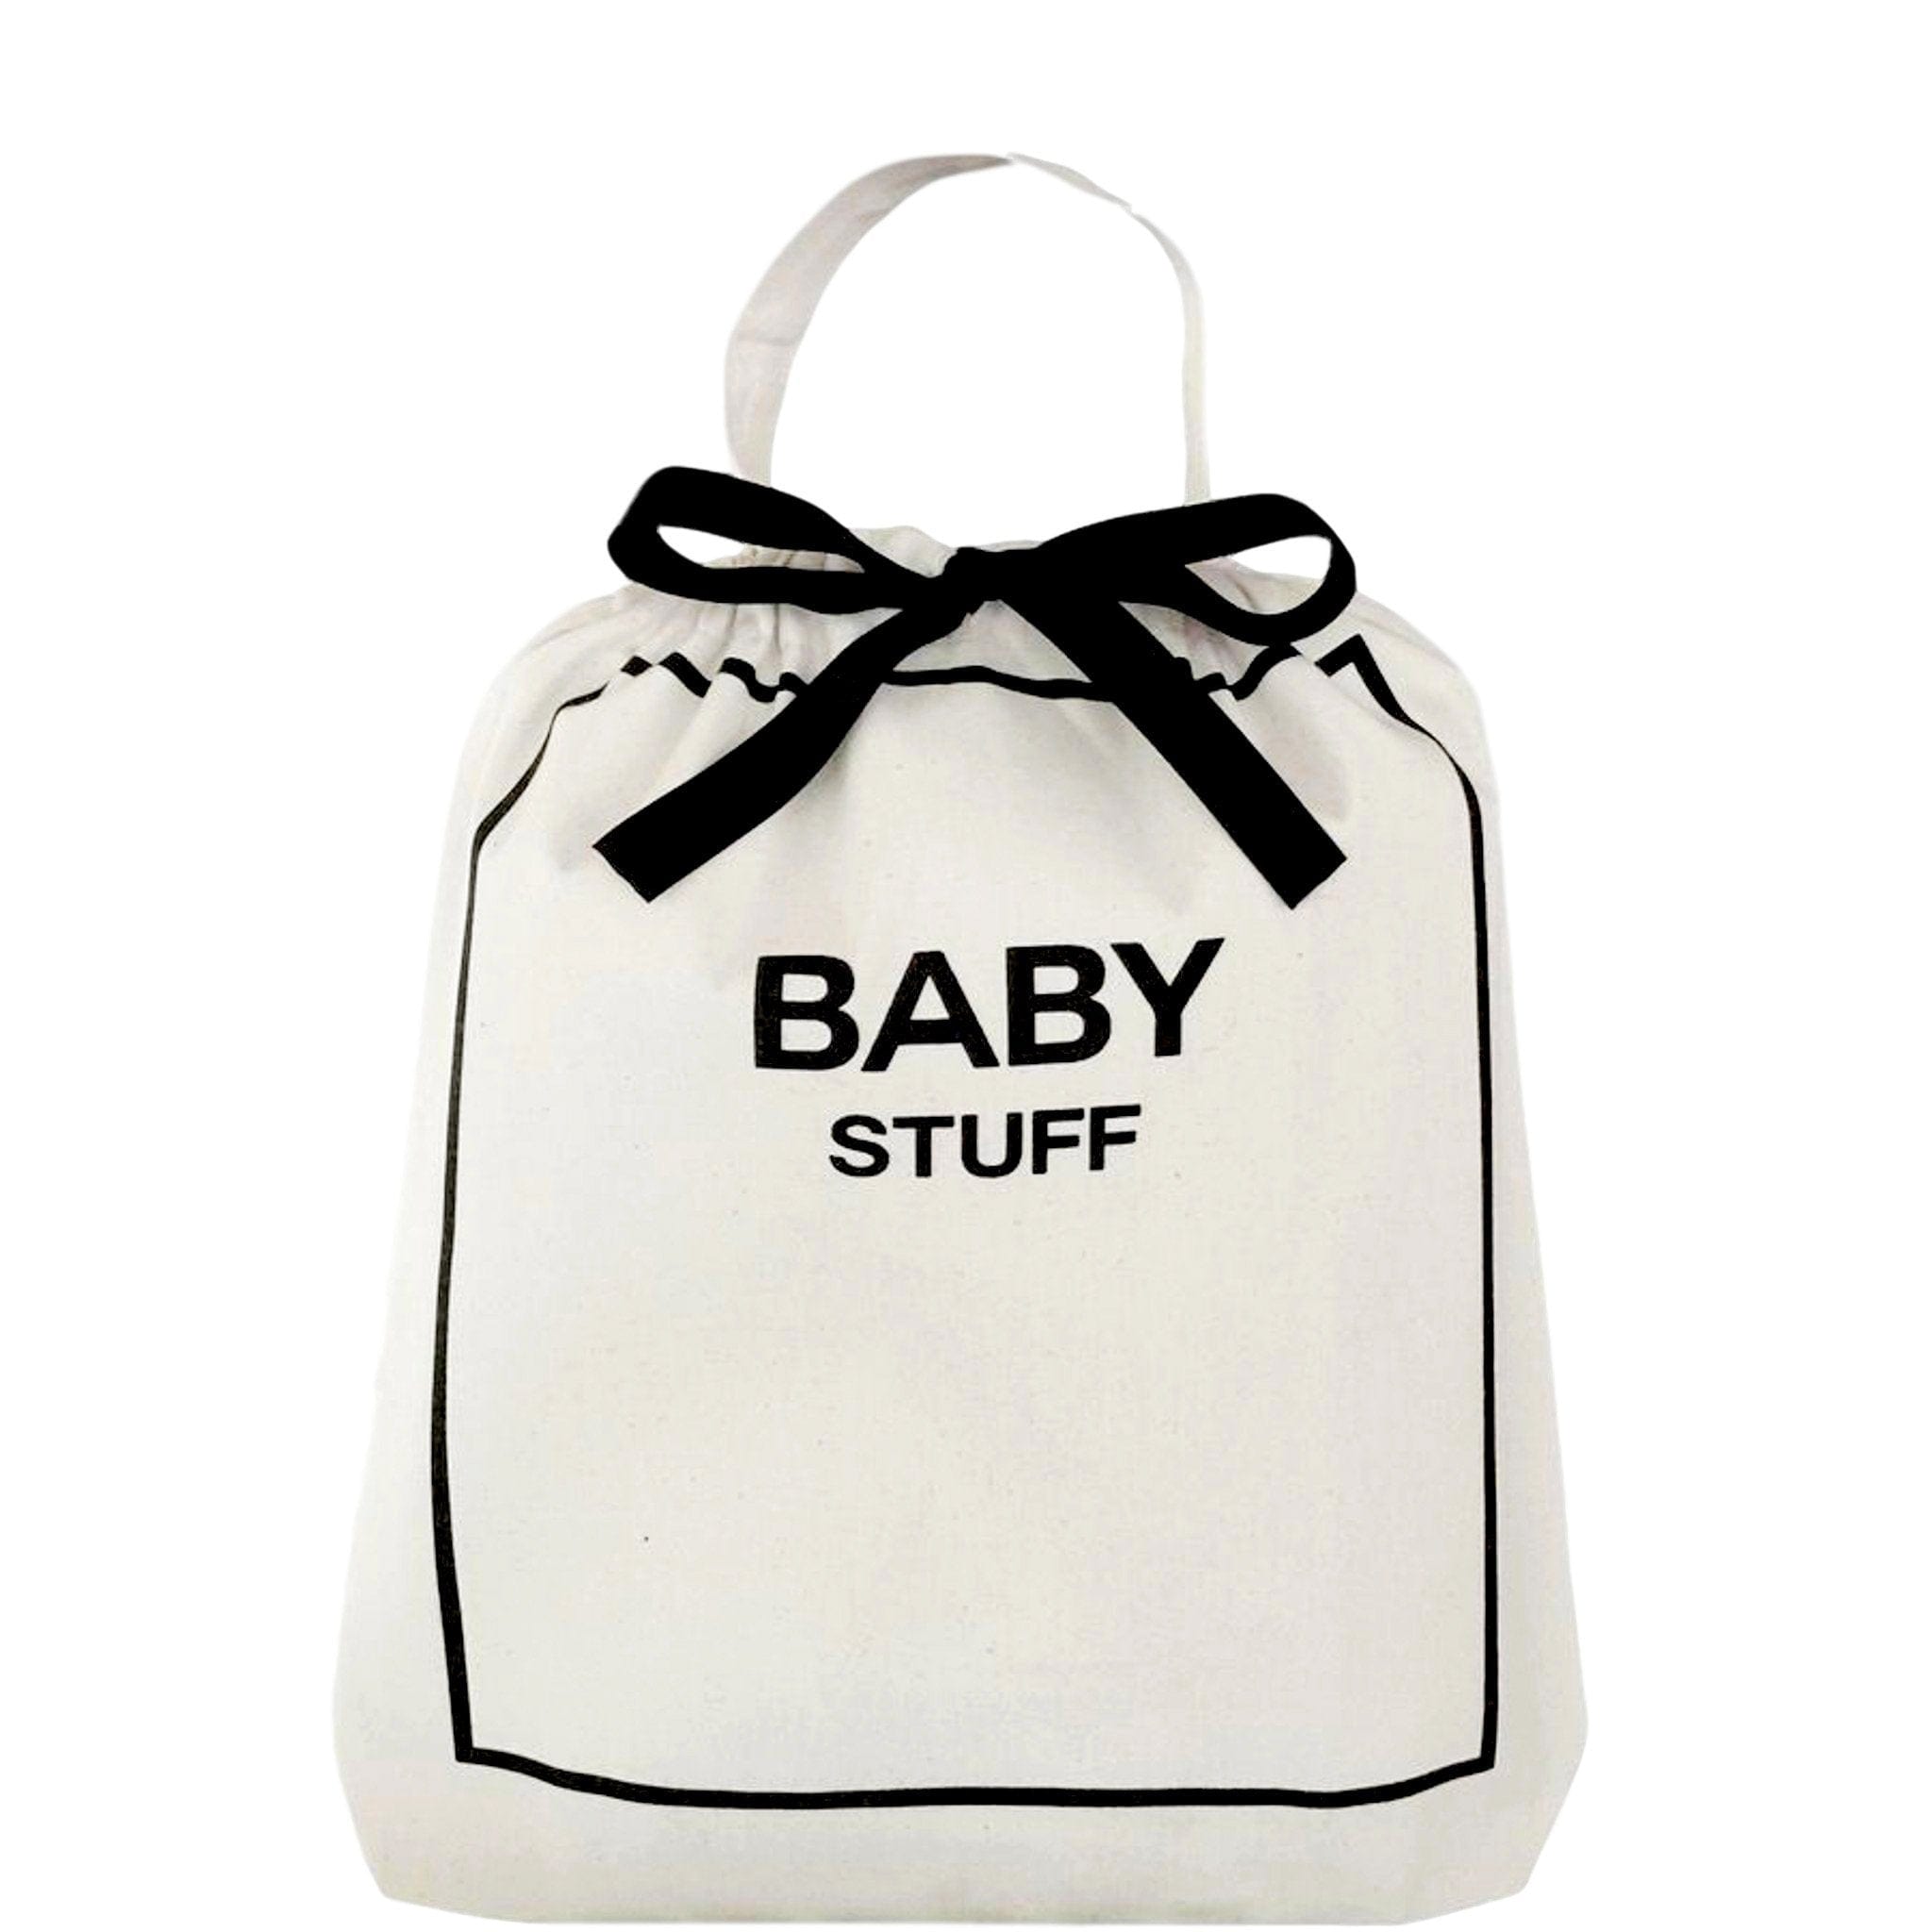 Baby organizing bag with "baby" stuff on front. 